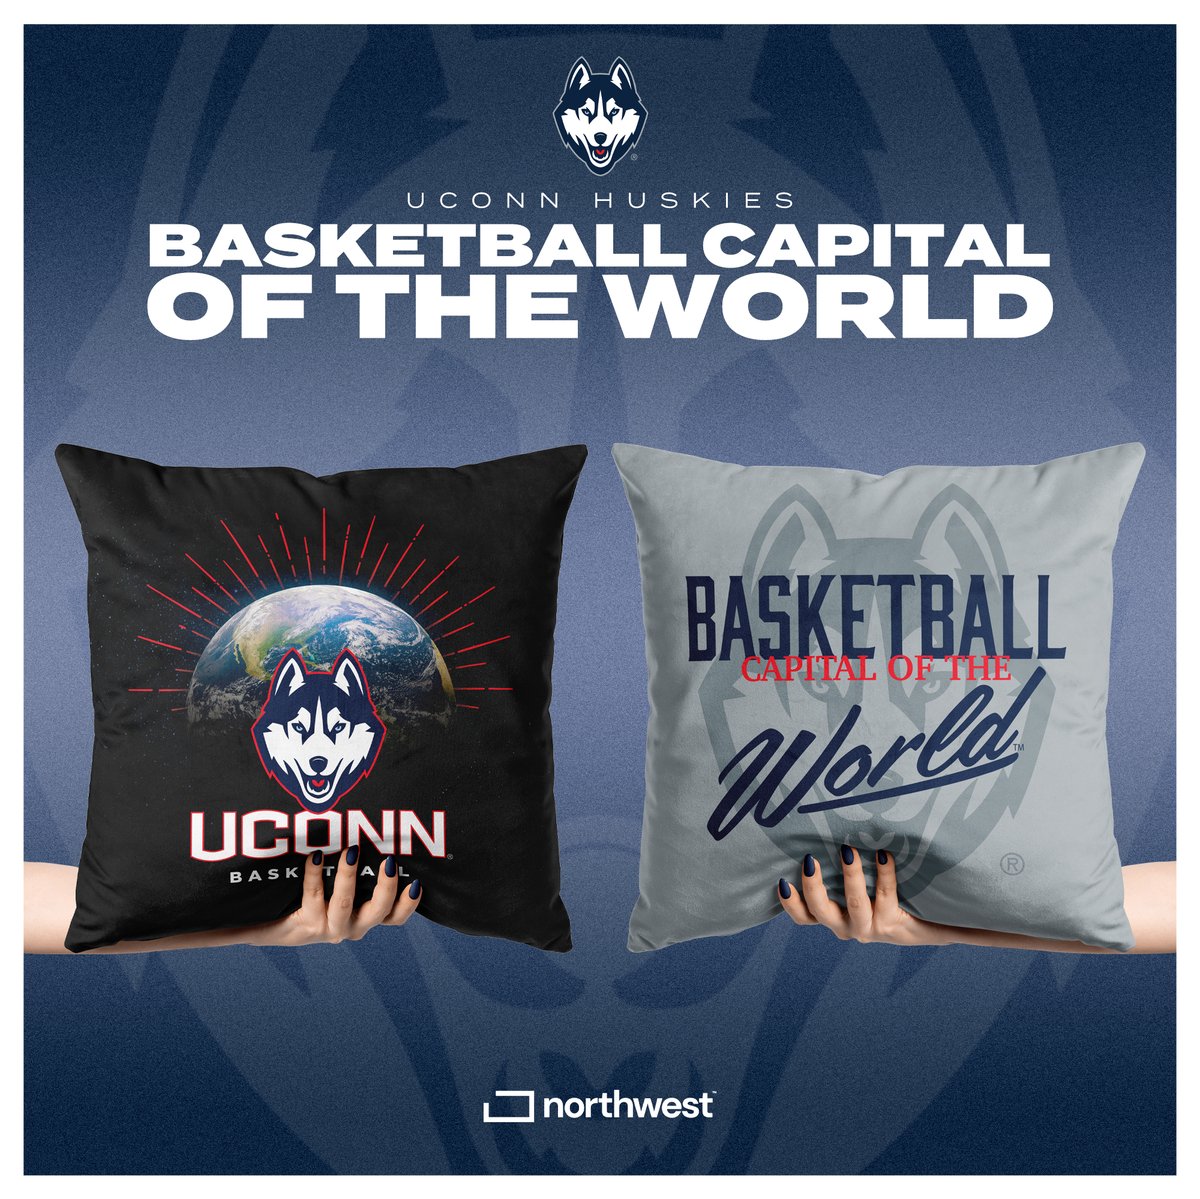 The Basketball Capital of the world. Now THAT has a nice ring to it. 😎🏀 Grab one of our @UConn throw pillows featuring a brand-new design: bit.ly/4apnrL9 #MarchMadness | #UConn | #Northwest